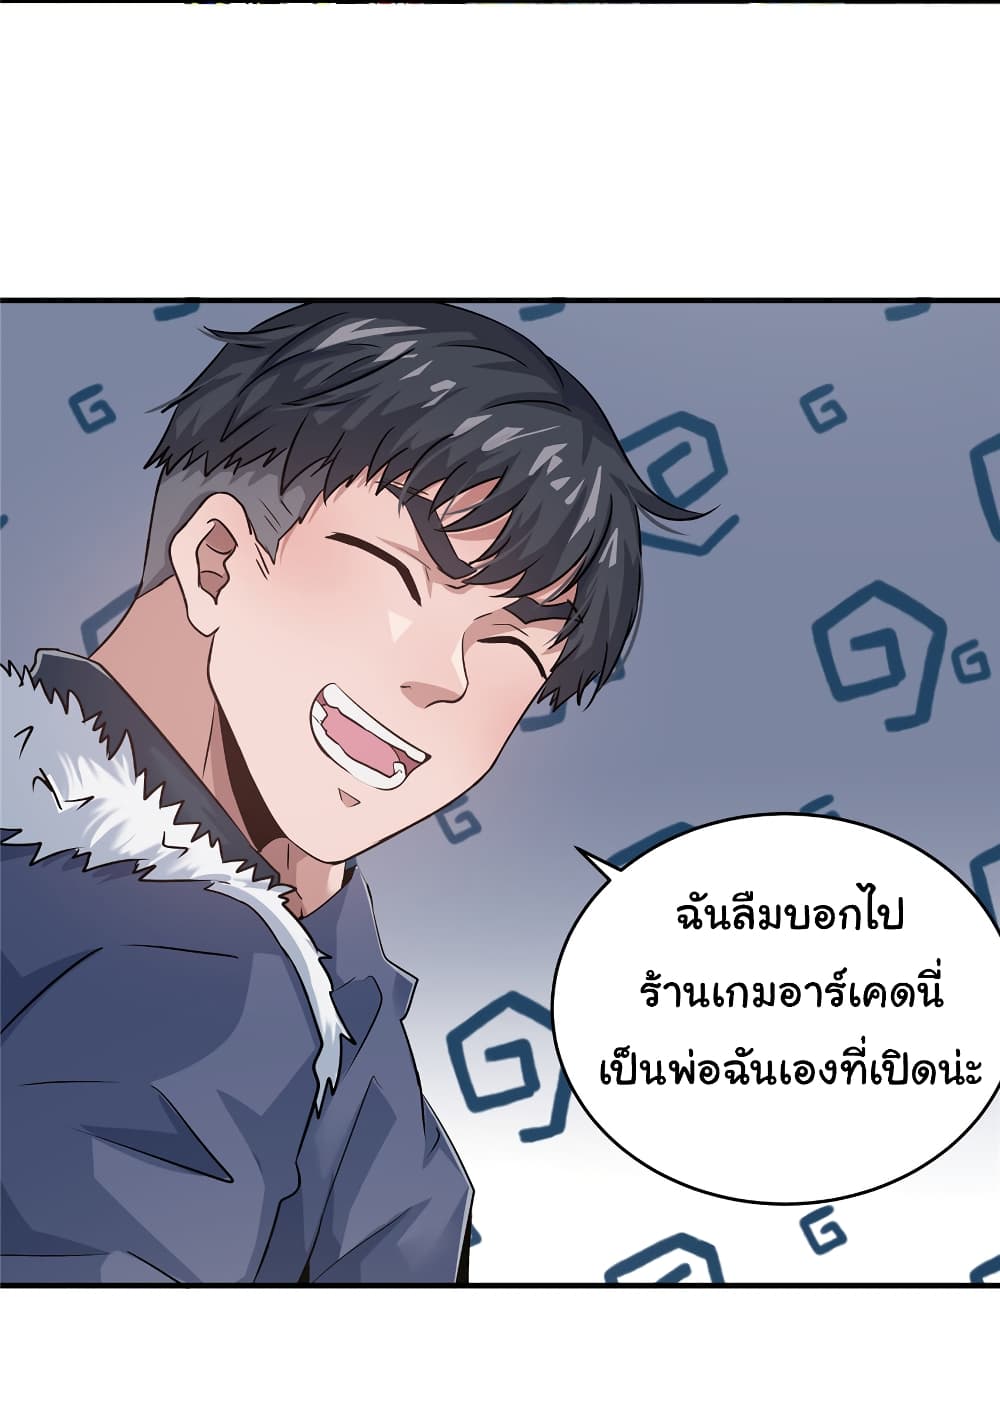 Live Steadily, Donโ€t Wave เธ•เธญเธเธ—เธตเน 31 (17)